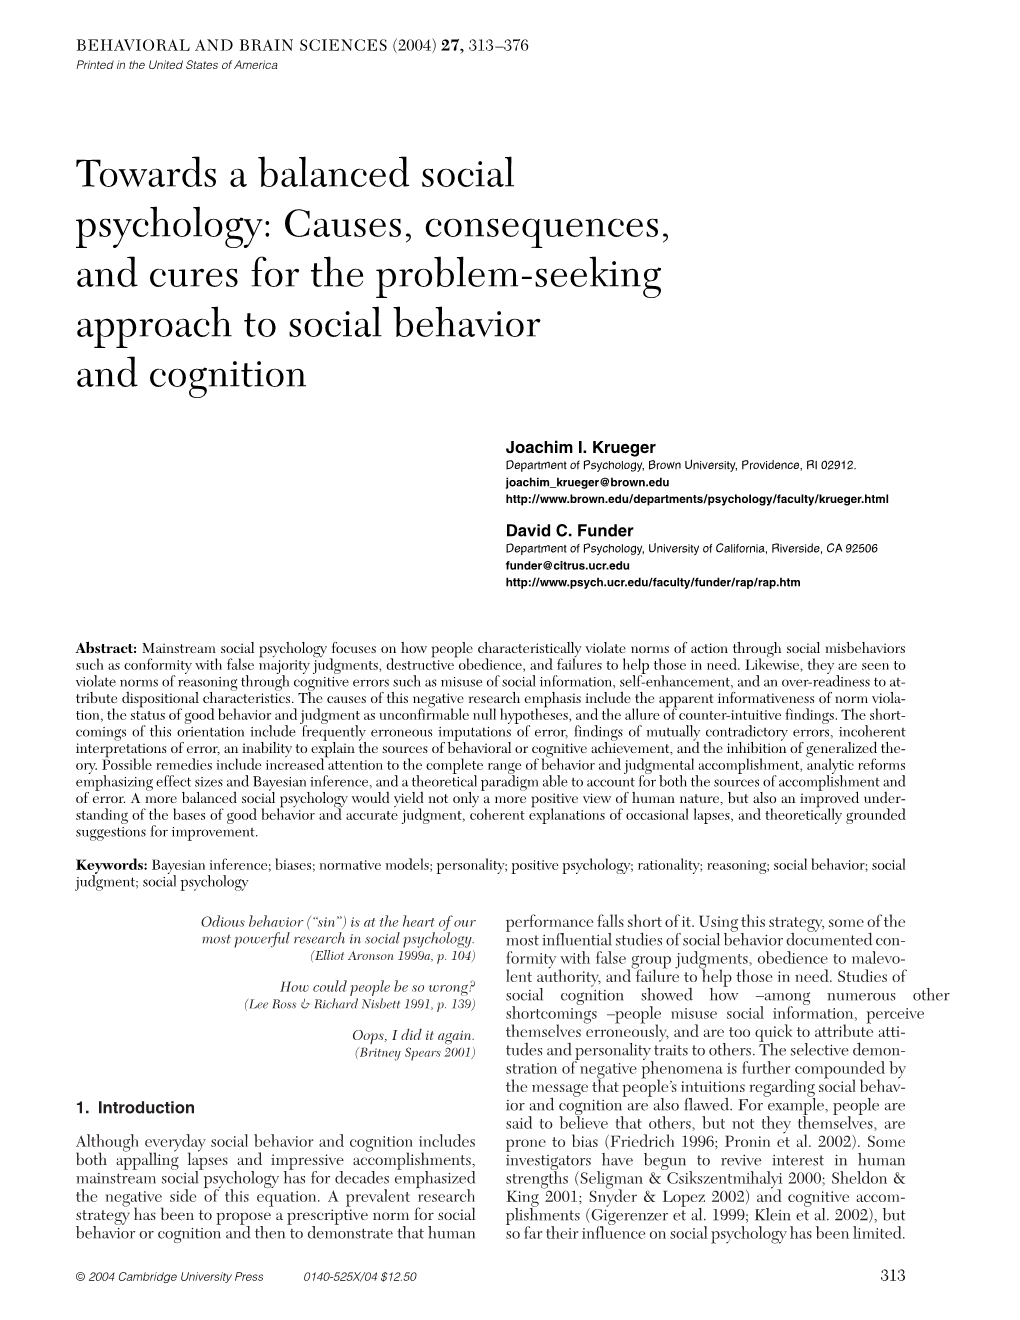 Social Psychology: Causes, Consequences, and Cures for the Problem-Seeking Approach to Social Behavior and Cognition